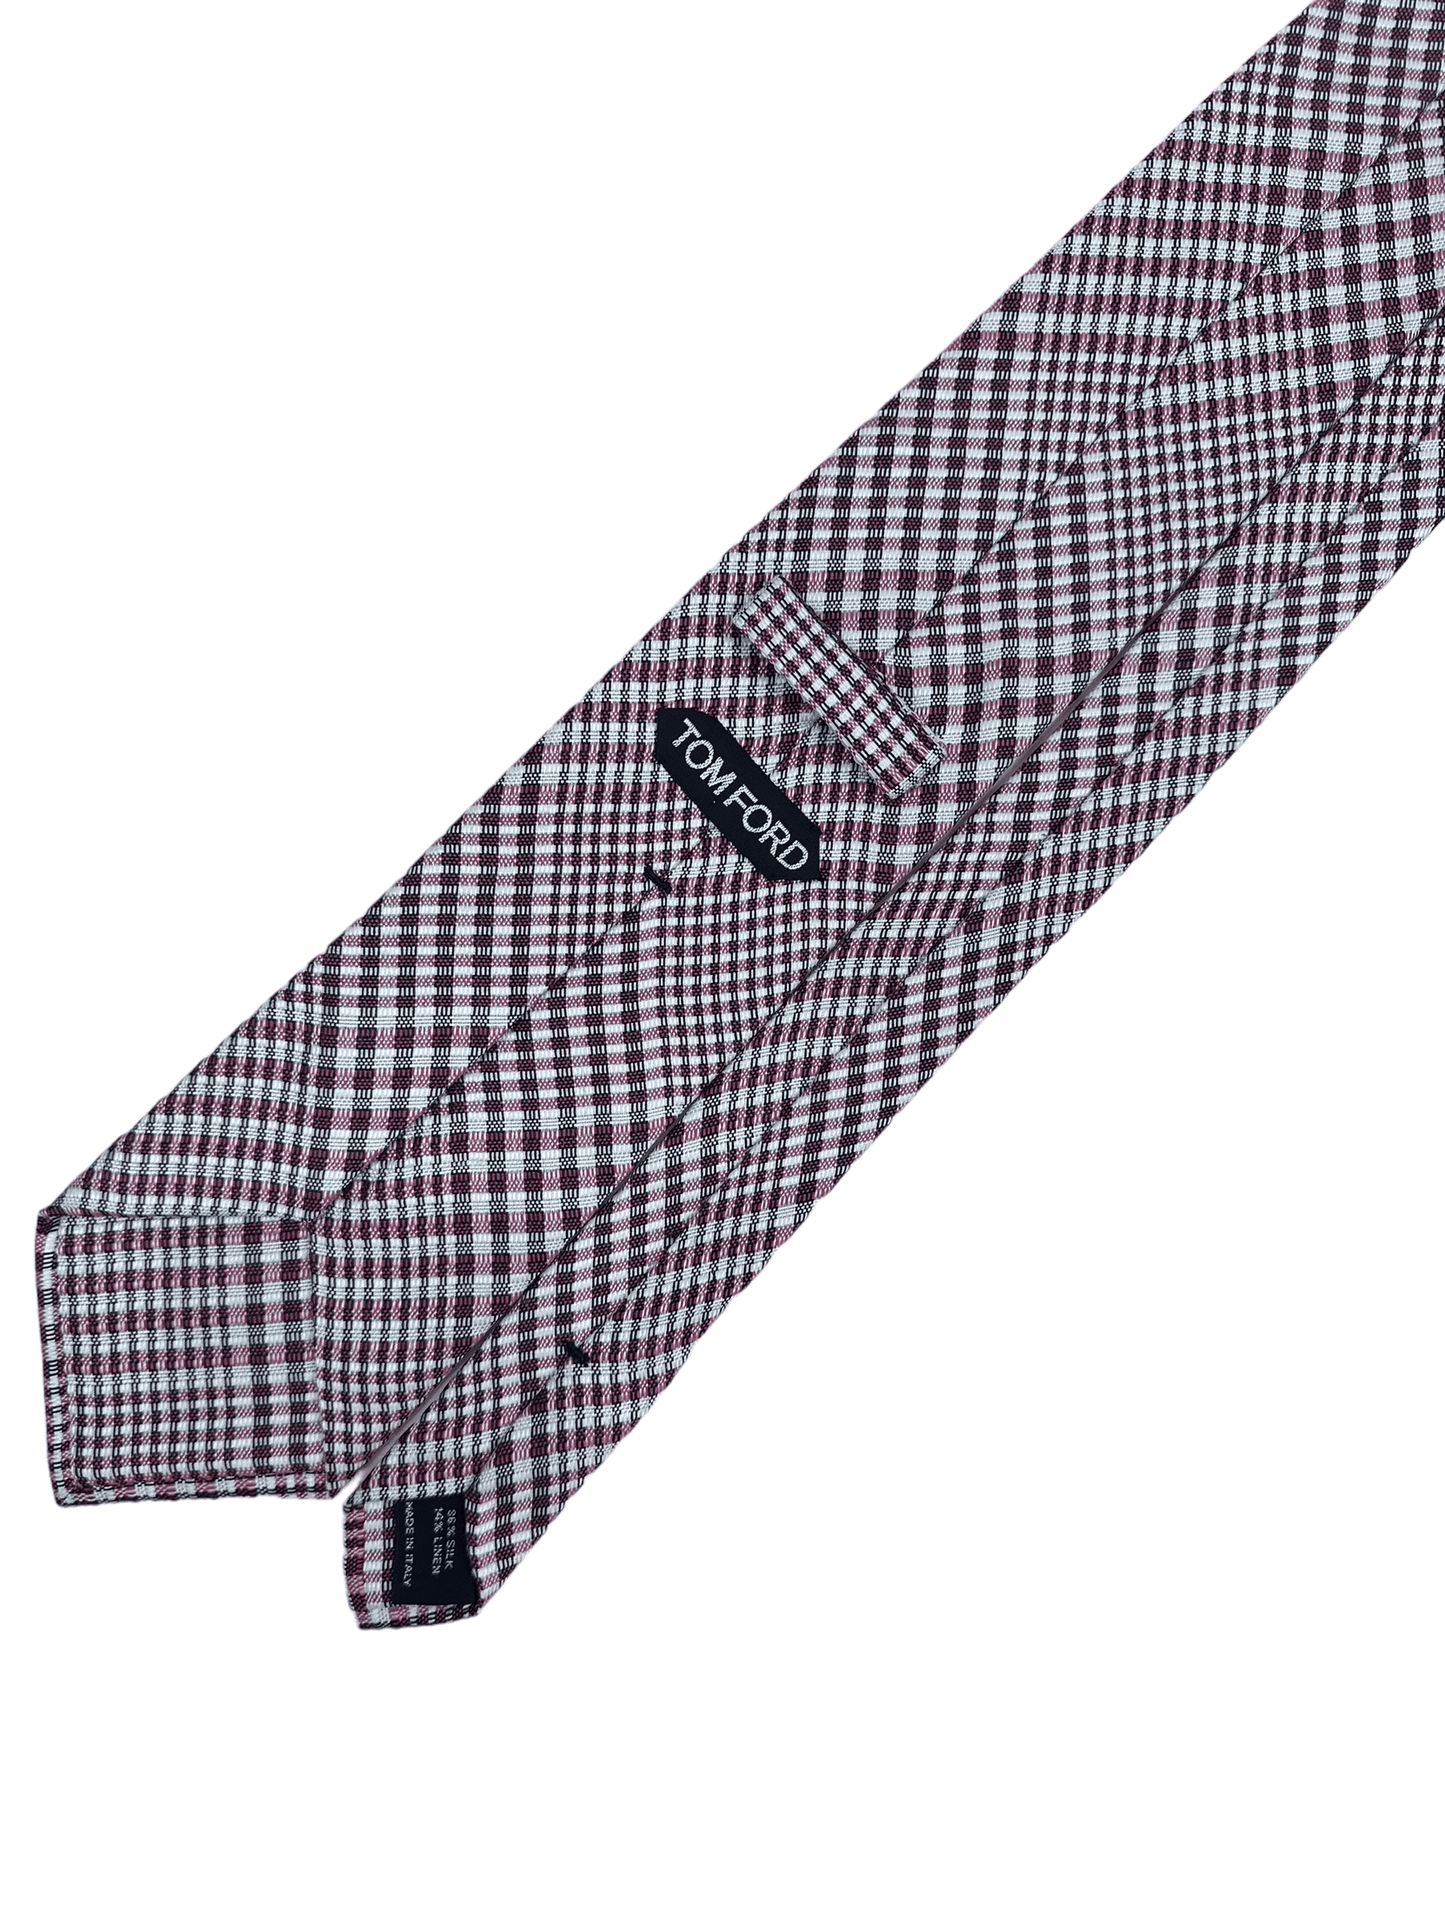 Tom Ford Red Plaid Silk Tie - Genuine Design luxury consignment Calgary, Alberta, Canada New & pre-owned clothing, shoes, accessories.